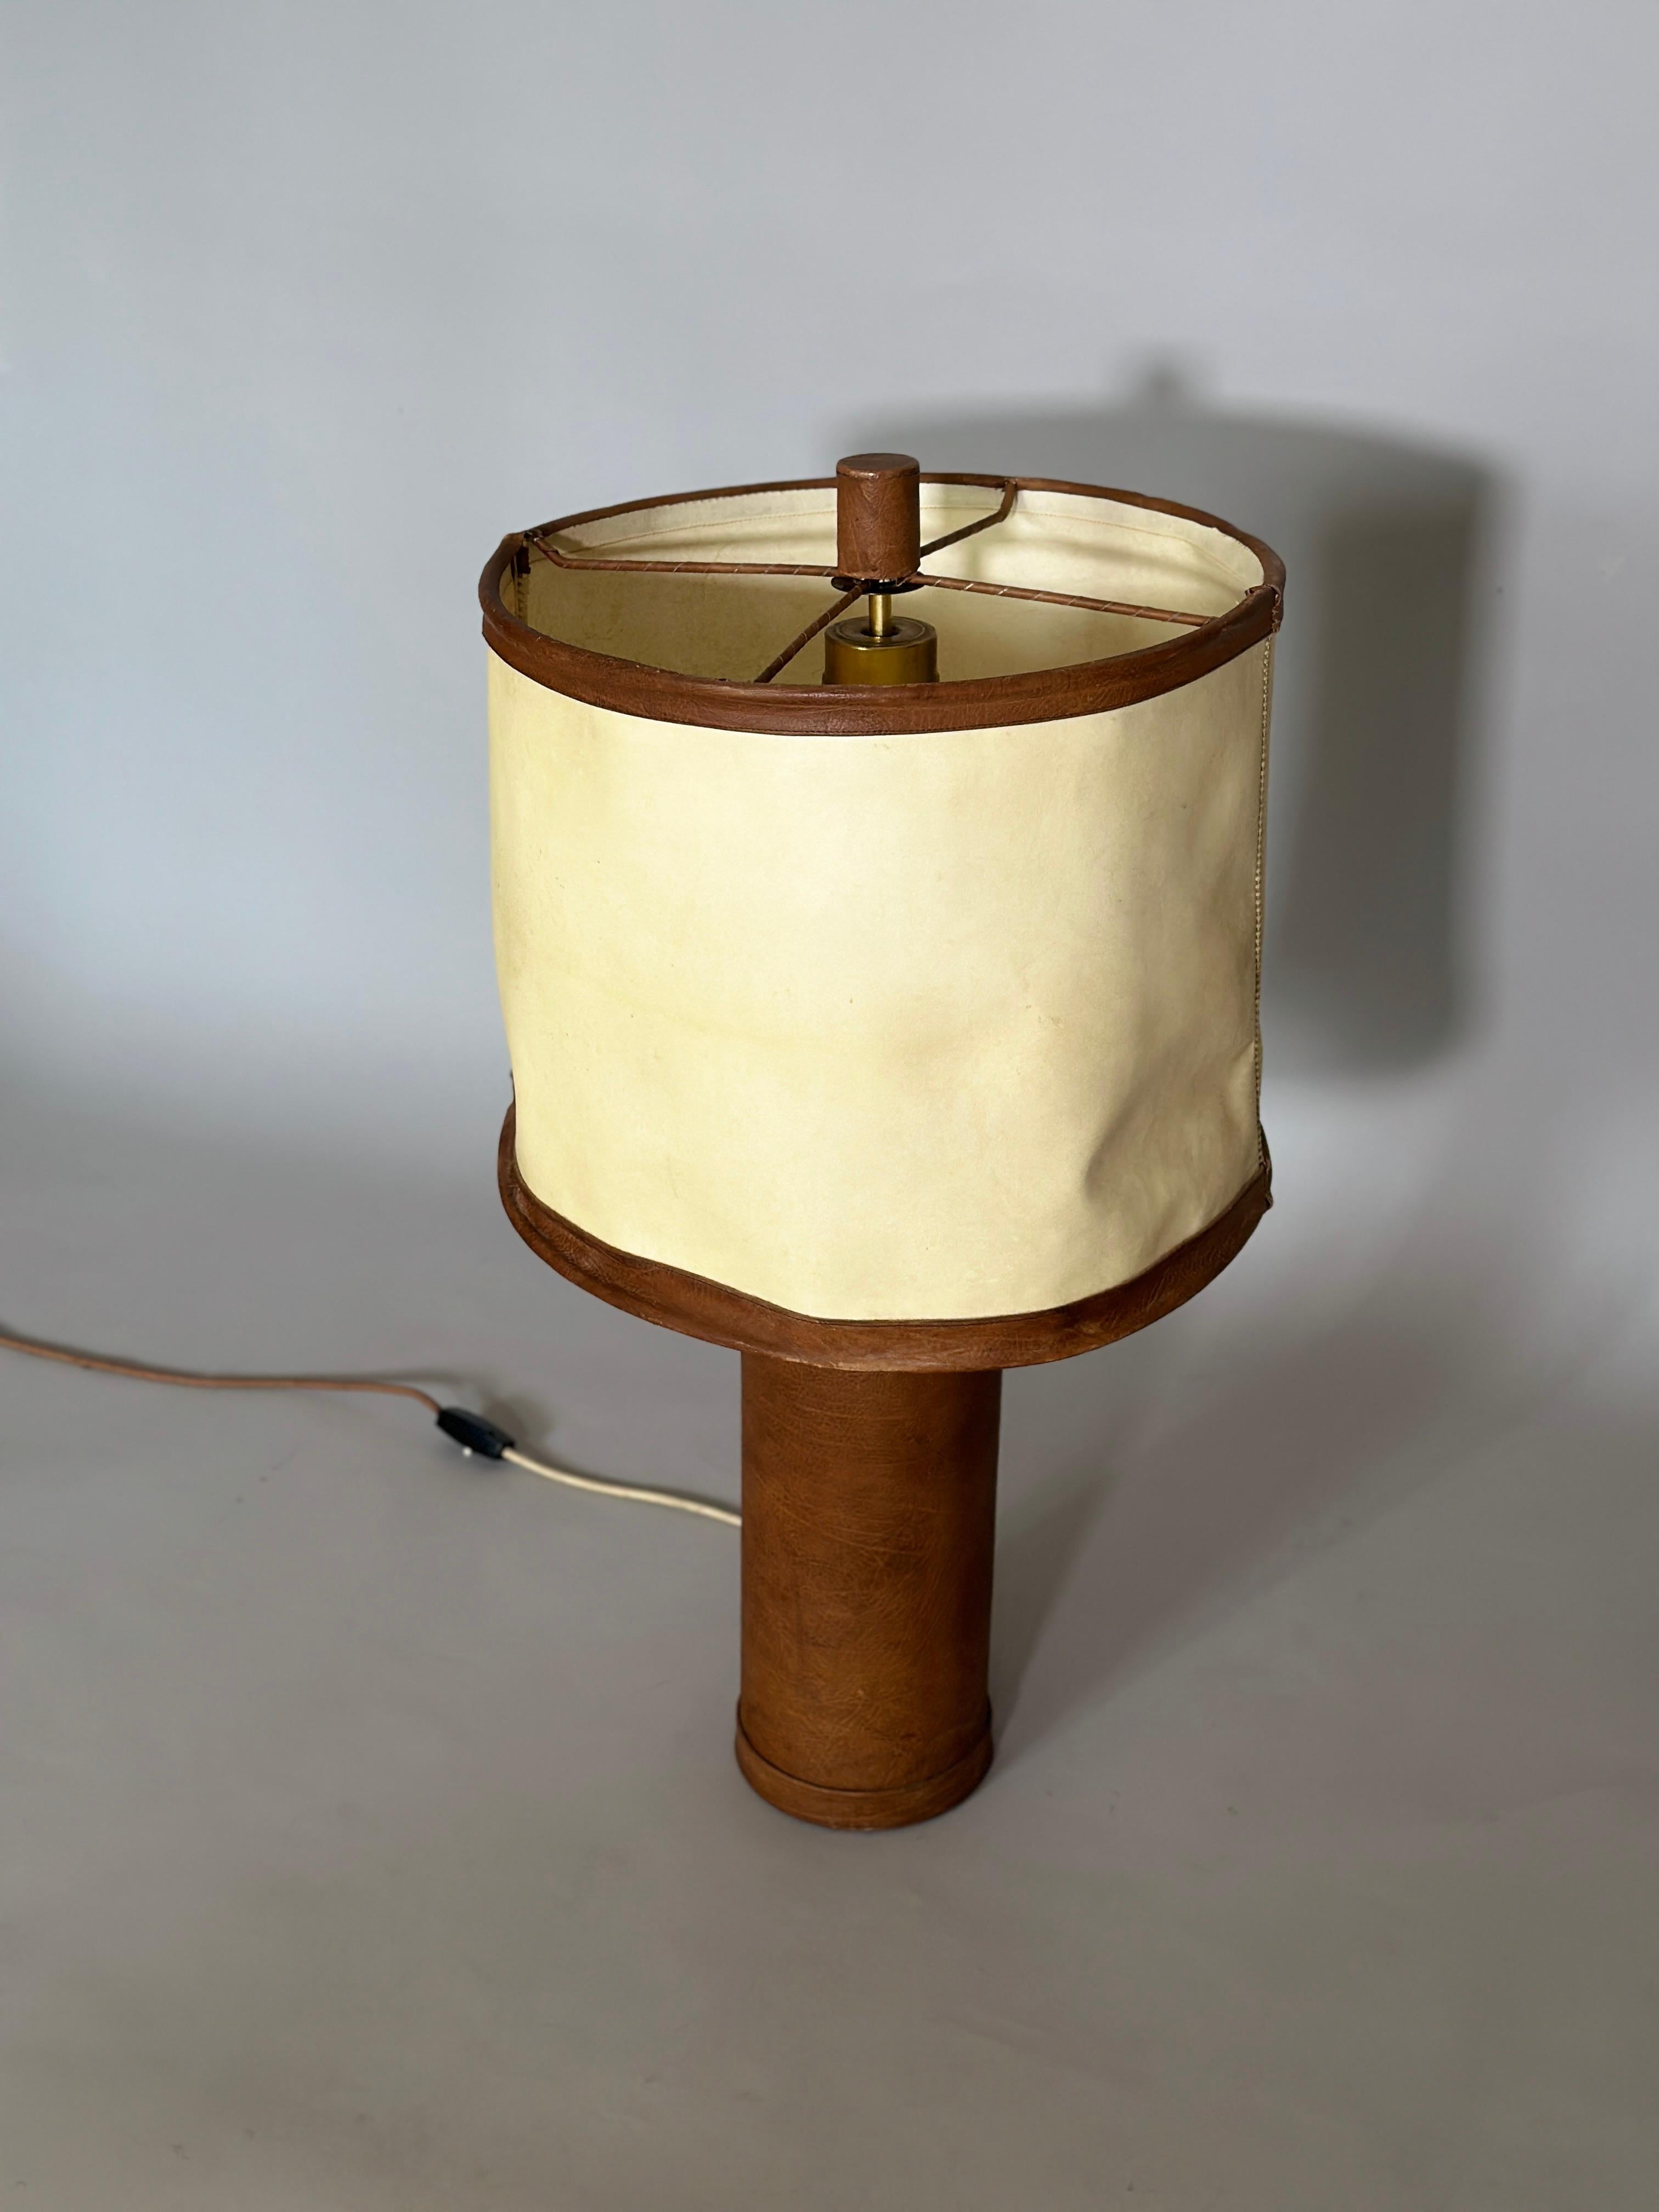 Charlotte Wawer leather and pergament table lamp 1940s.